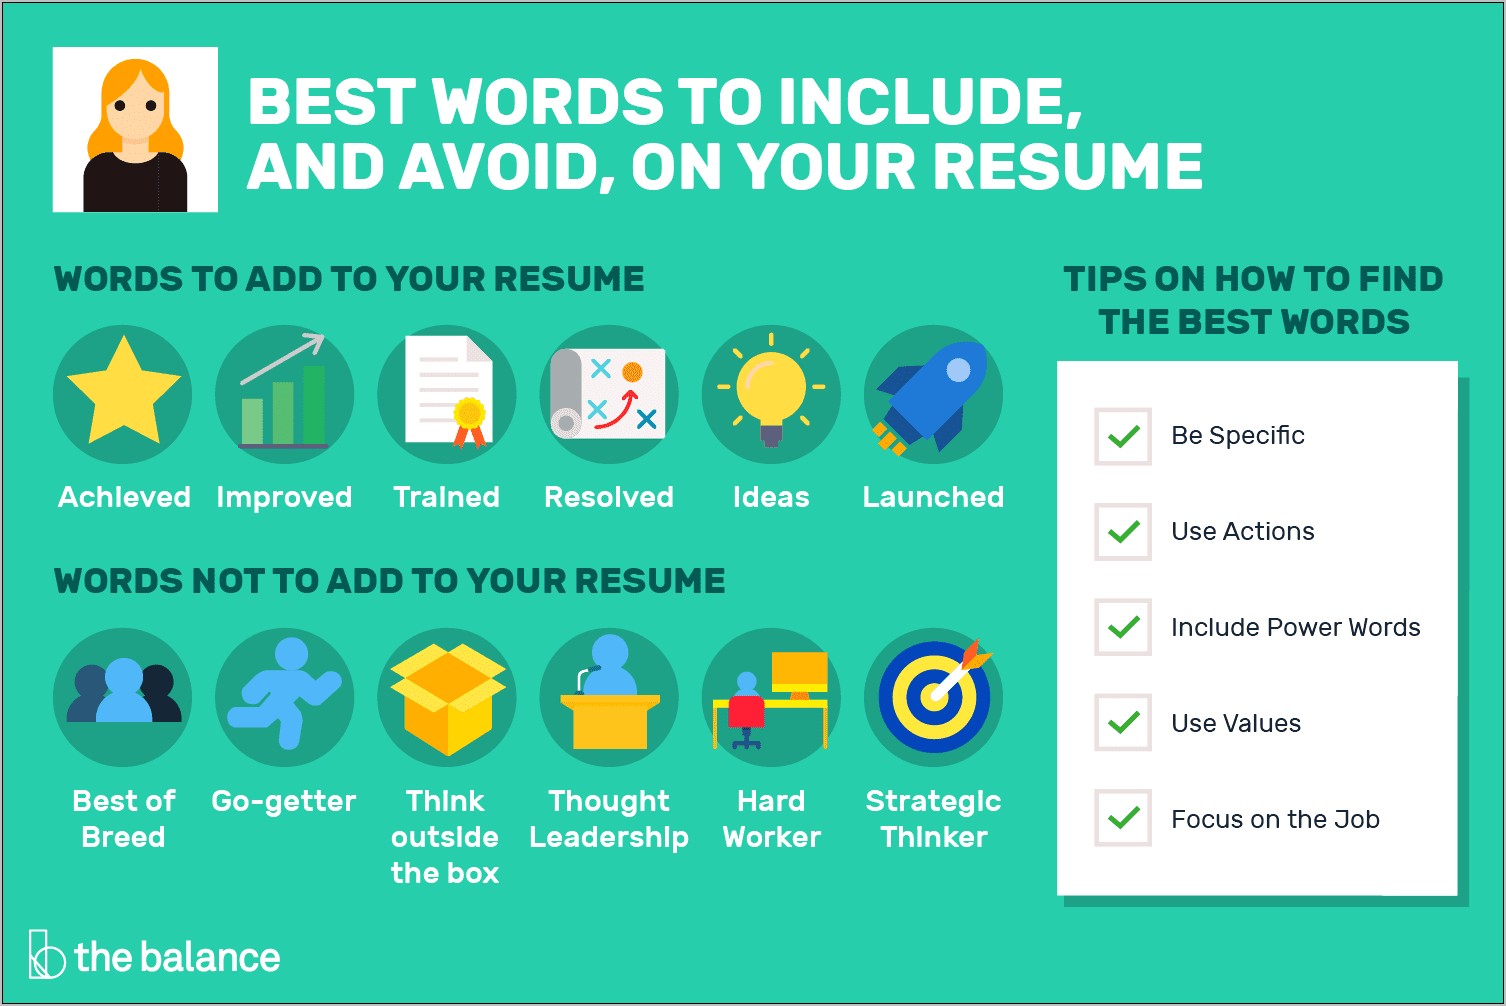 Good General Skills To Put On A Resume